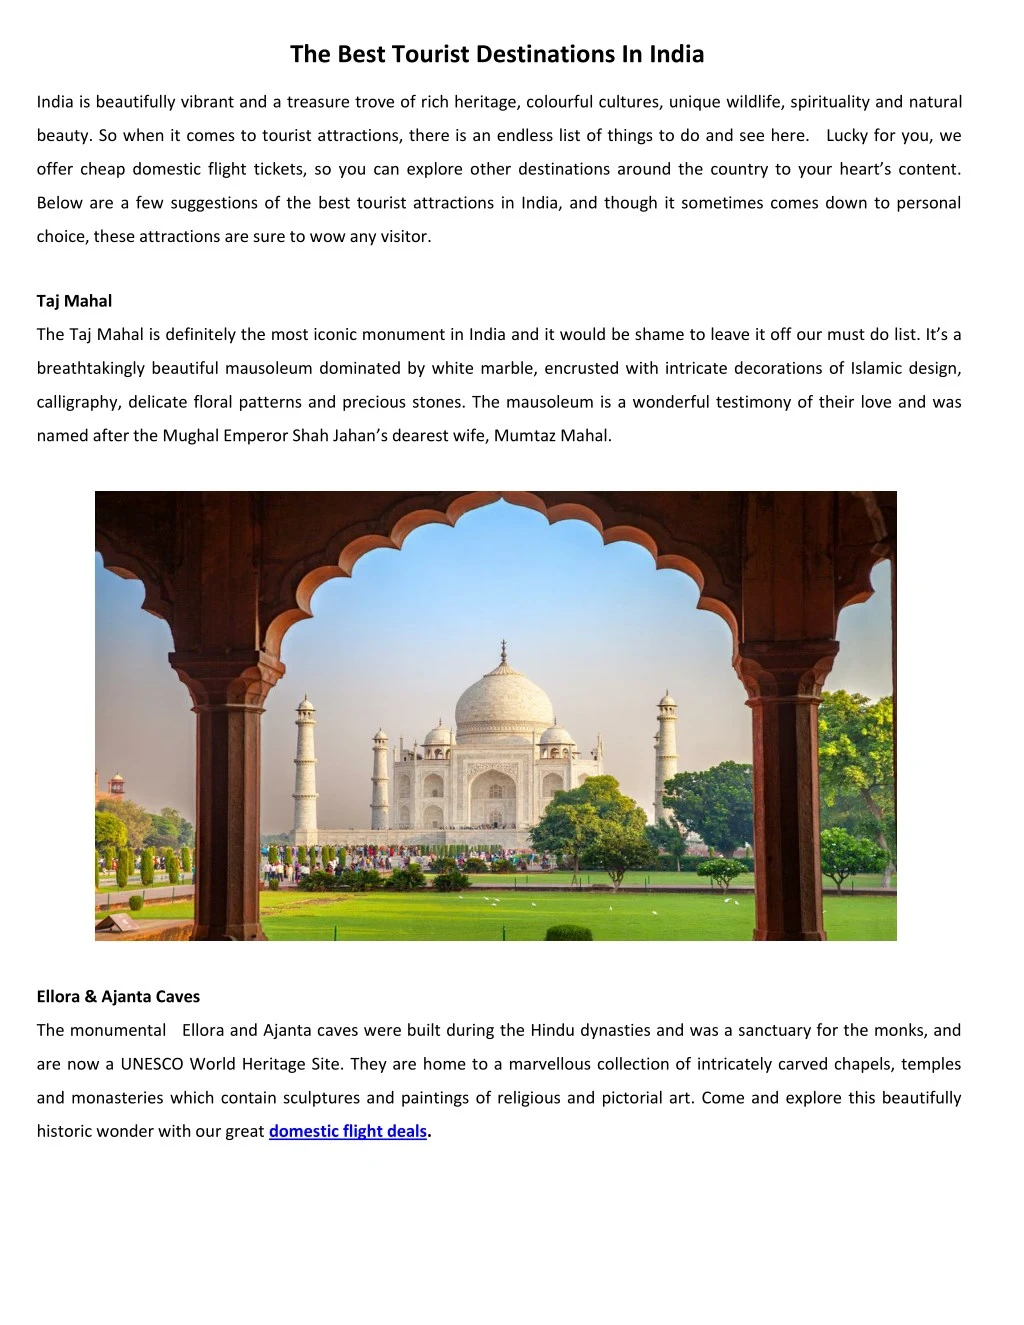 PPT - The Best Tourist Destinations In India PowerPoint Presentation ...